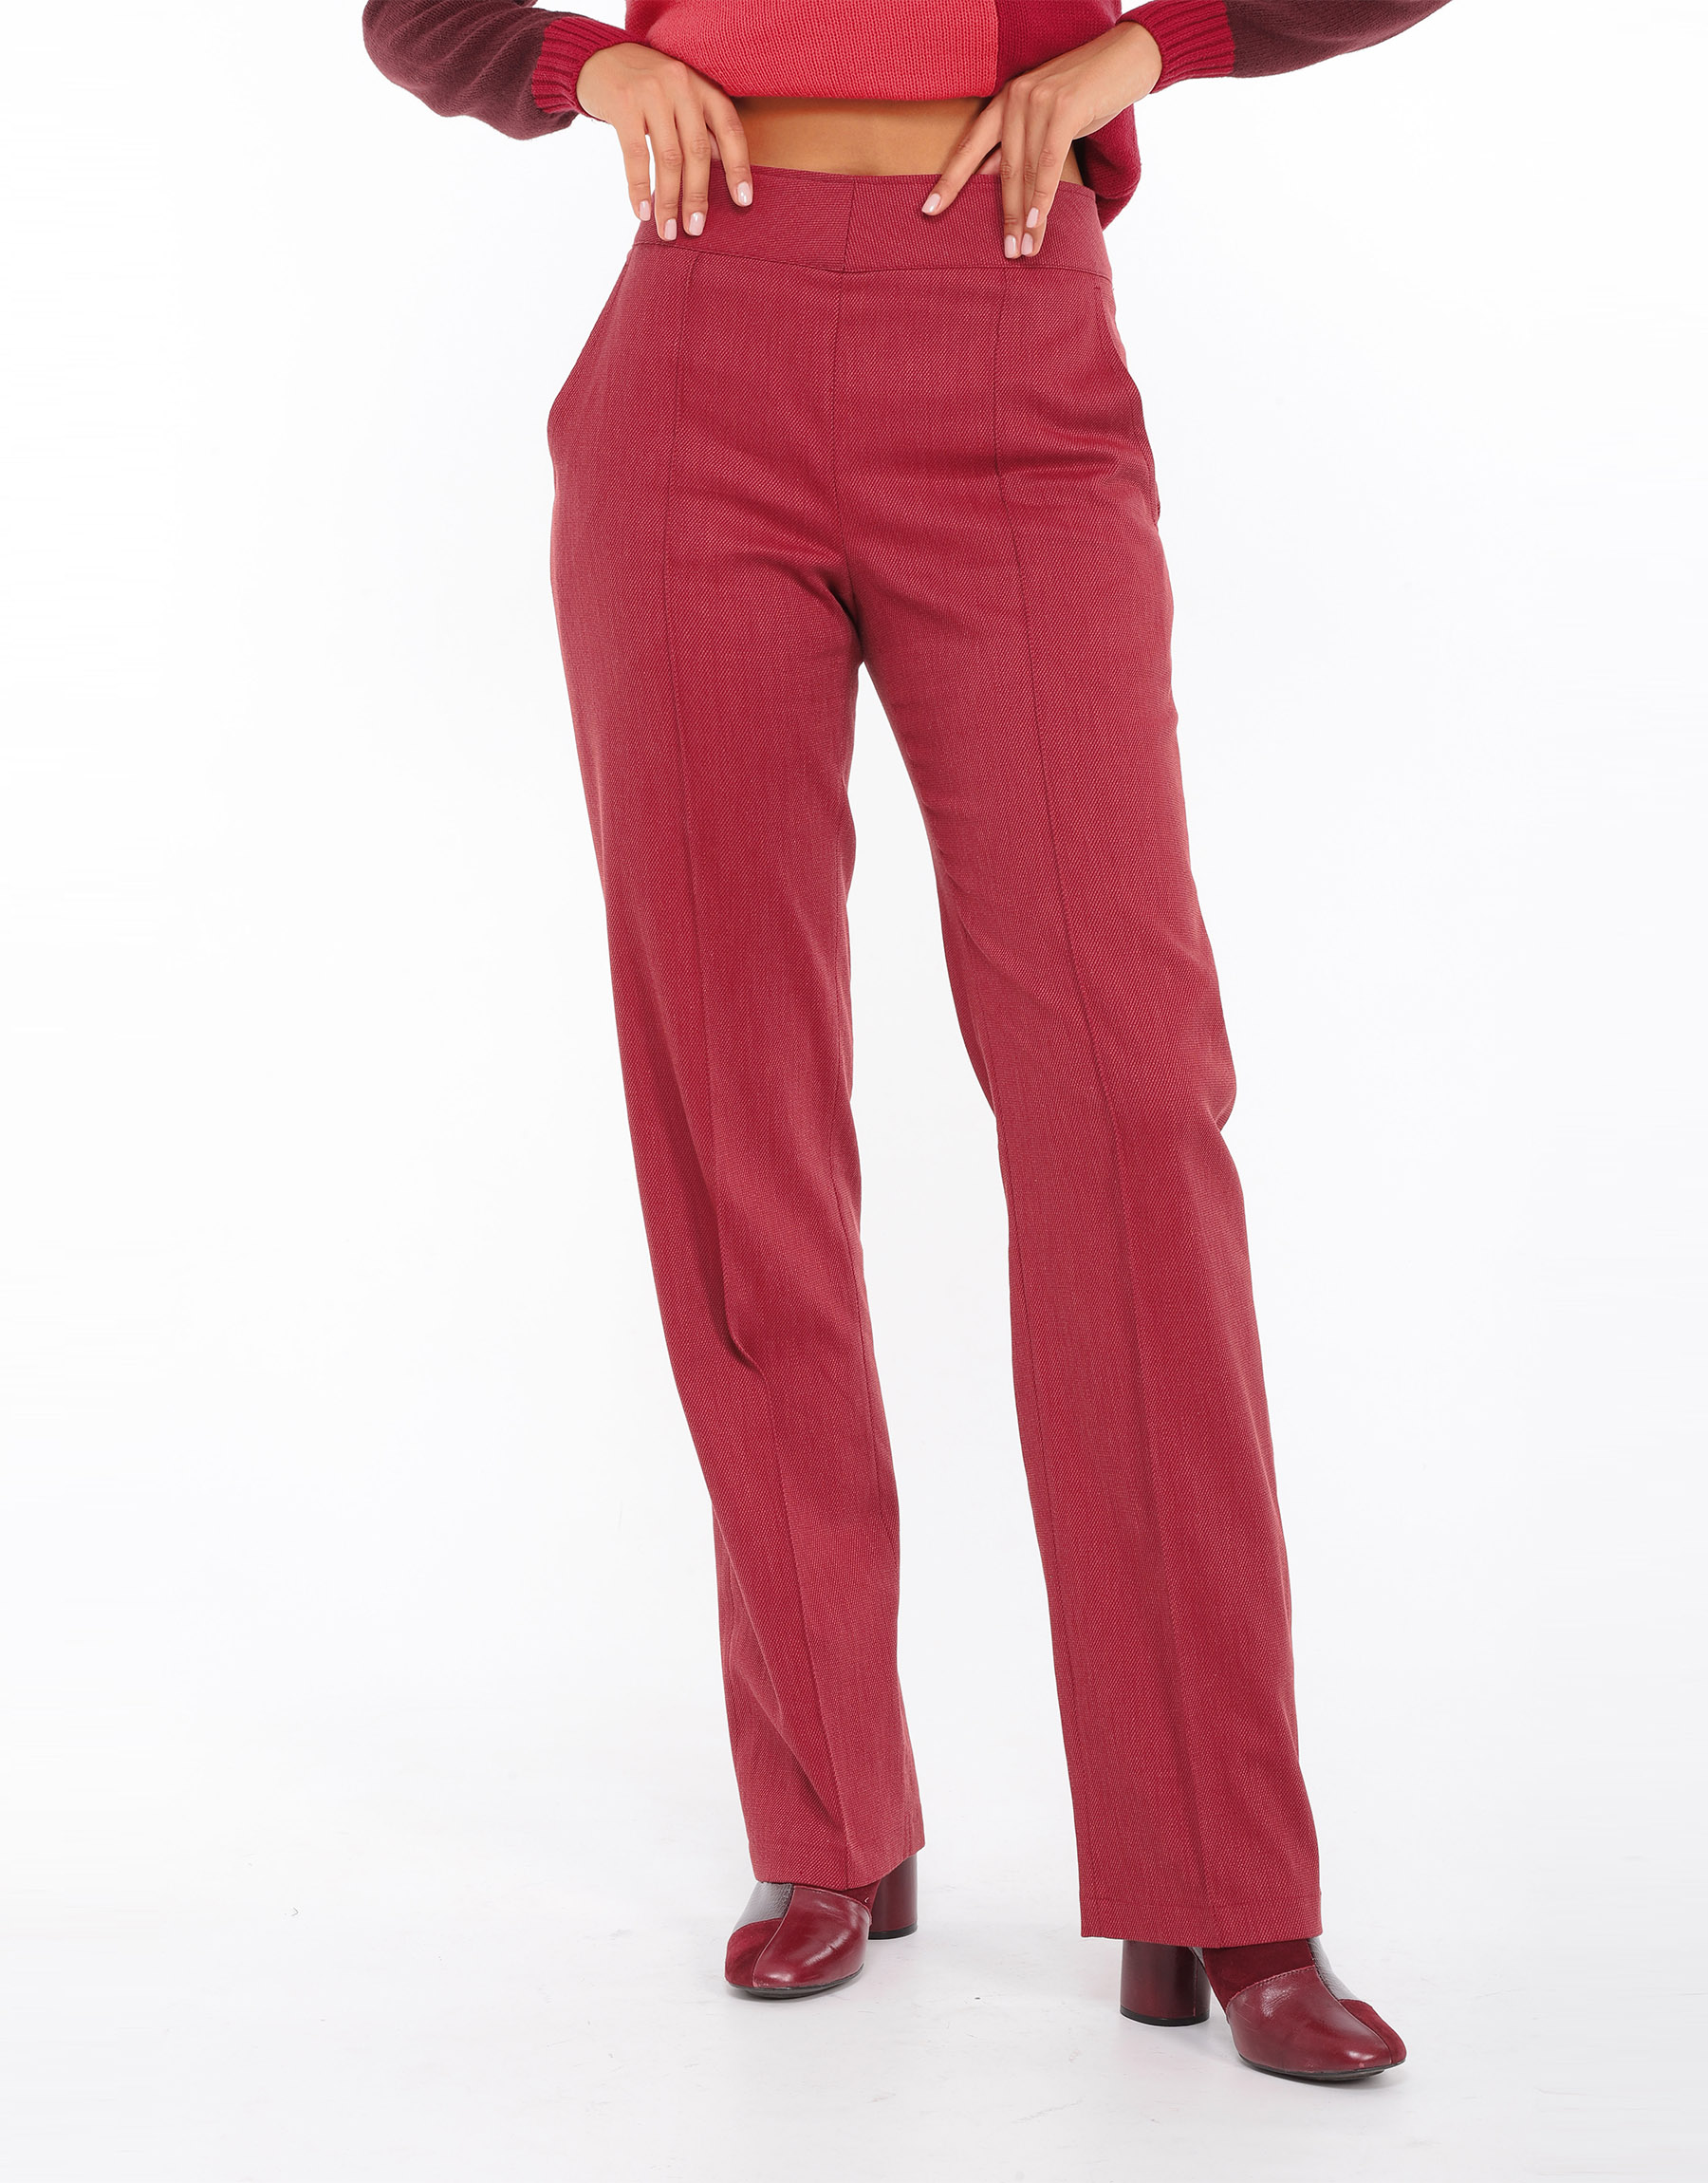 High-waisted straight trousers in black iridescent wool or cotton and red silk